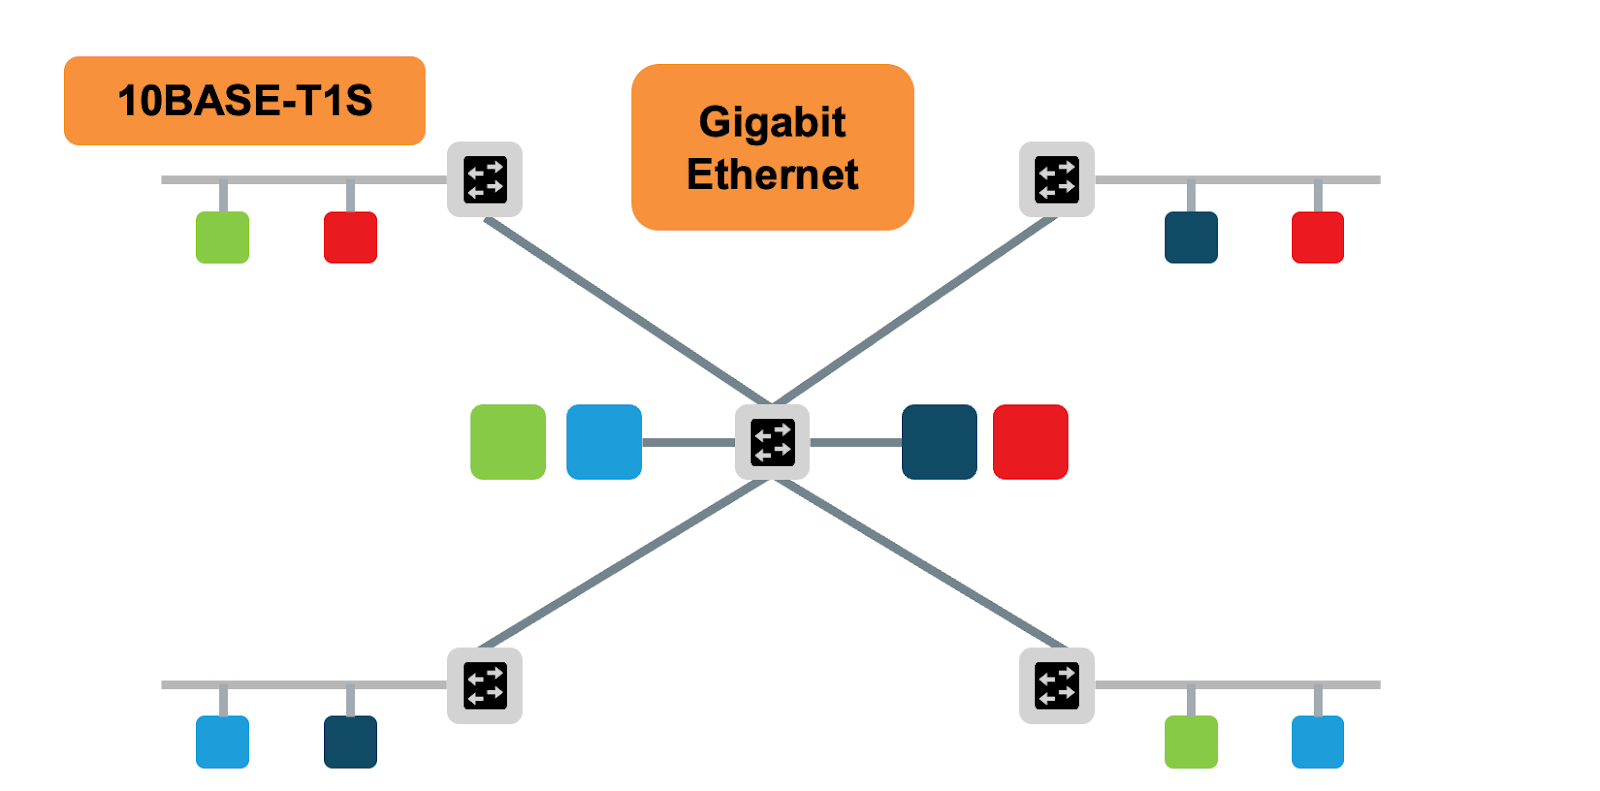 Software defined vehicles can employ a range of modern networks such as automotive ethernet